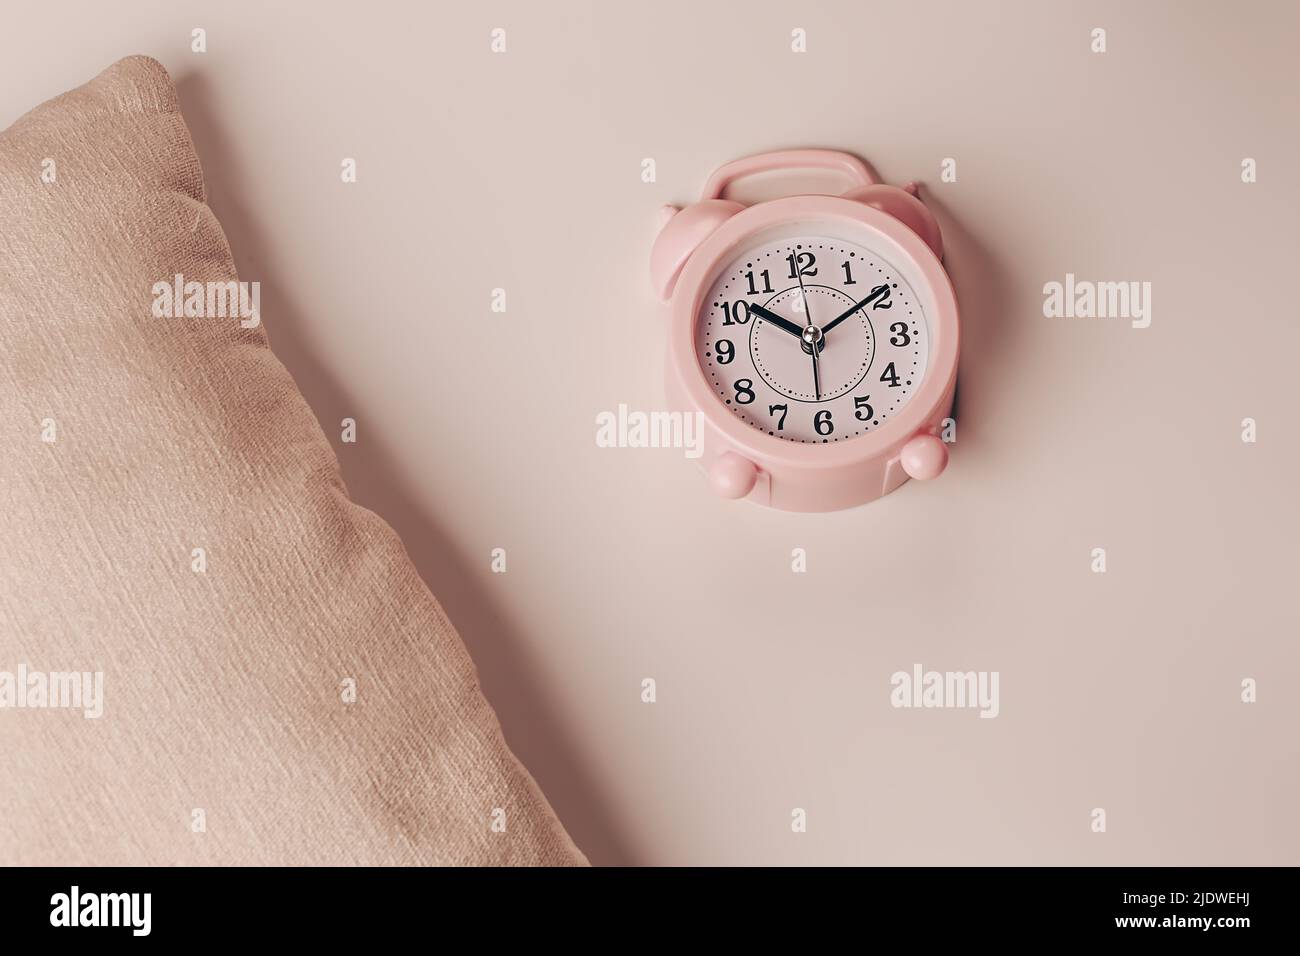 Pillow and alarm clock on a beige background. Healthy restful sleep concept. Stock Photo